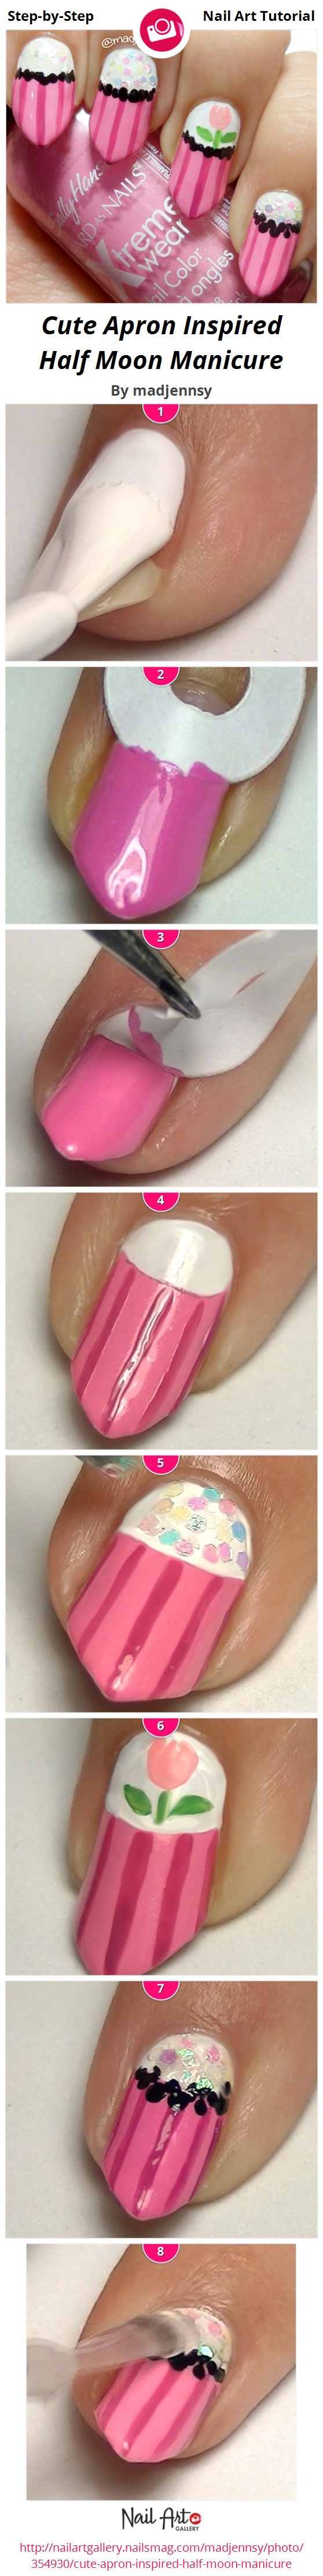 Cute Apron Inspired Half Moon Manicure - Nail Art Gallery